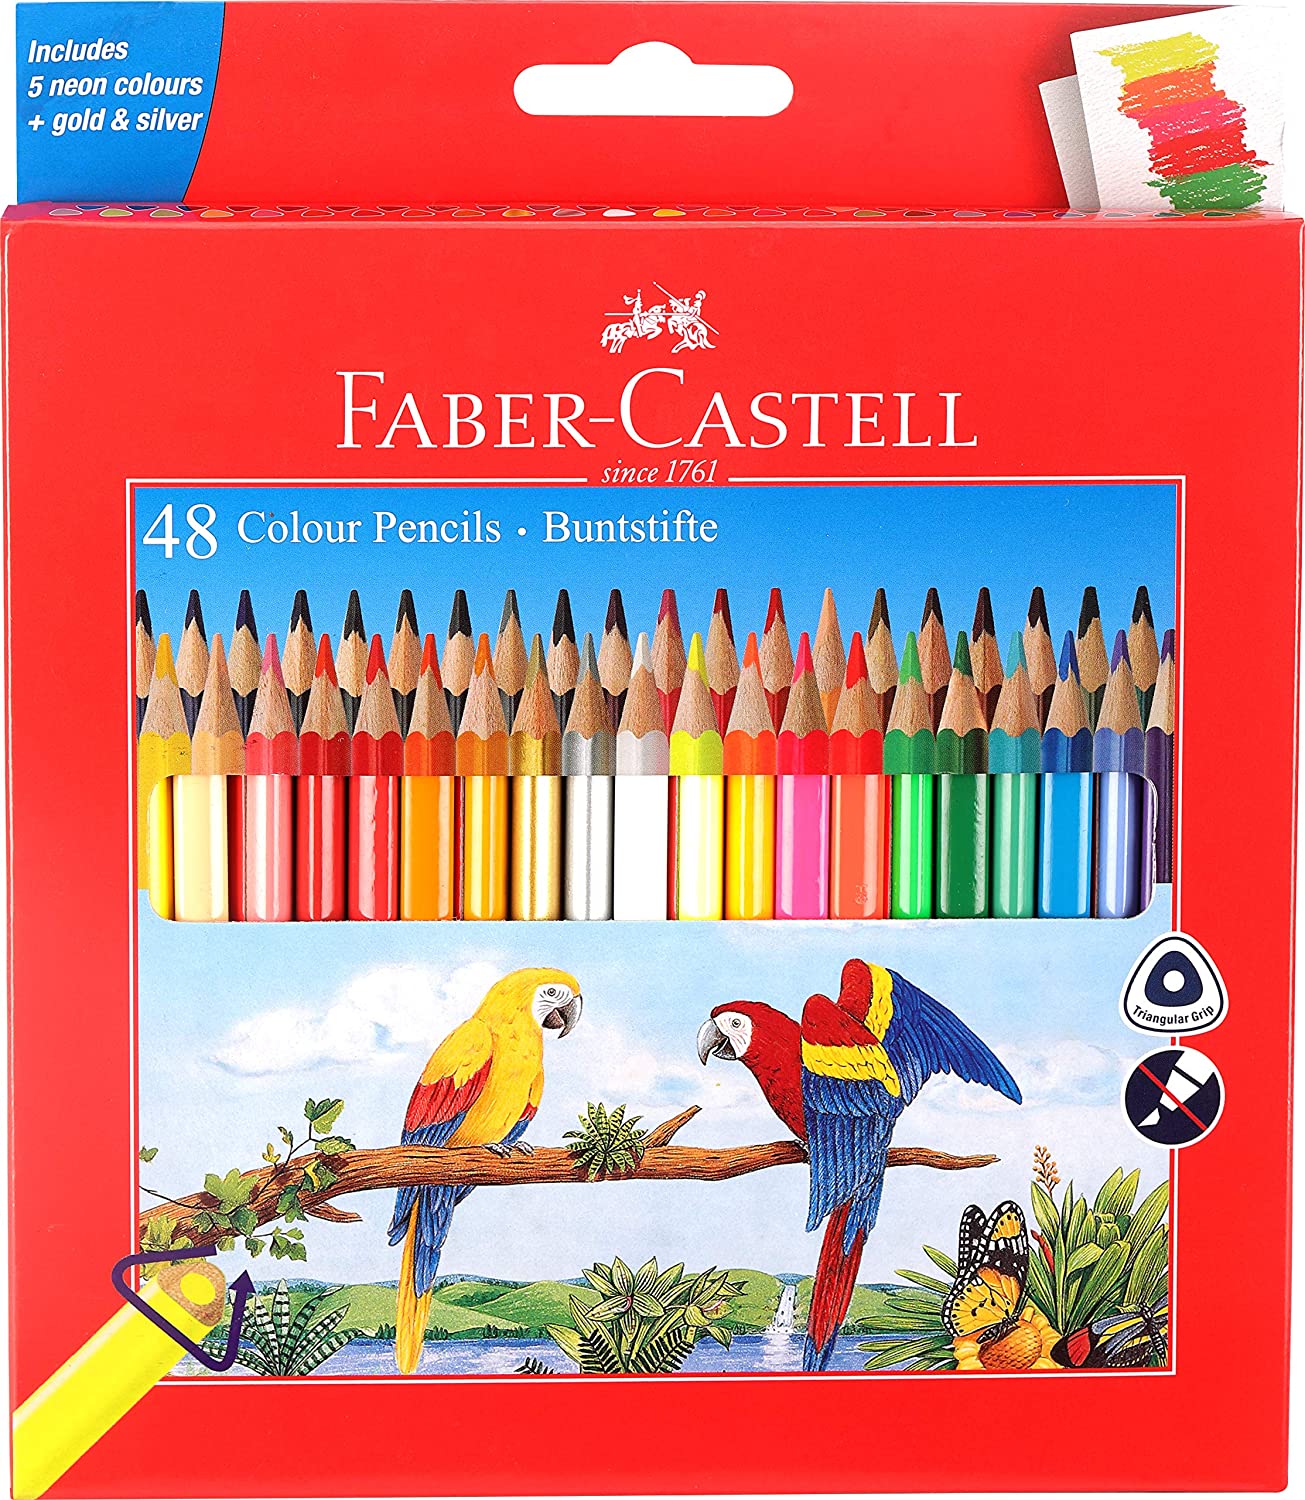 Faber Castell 48 Shades Colour Pencils Online Stationery Trivandrum